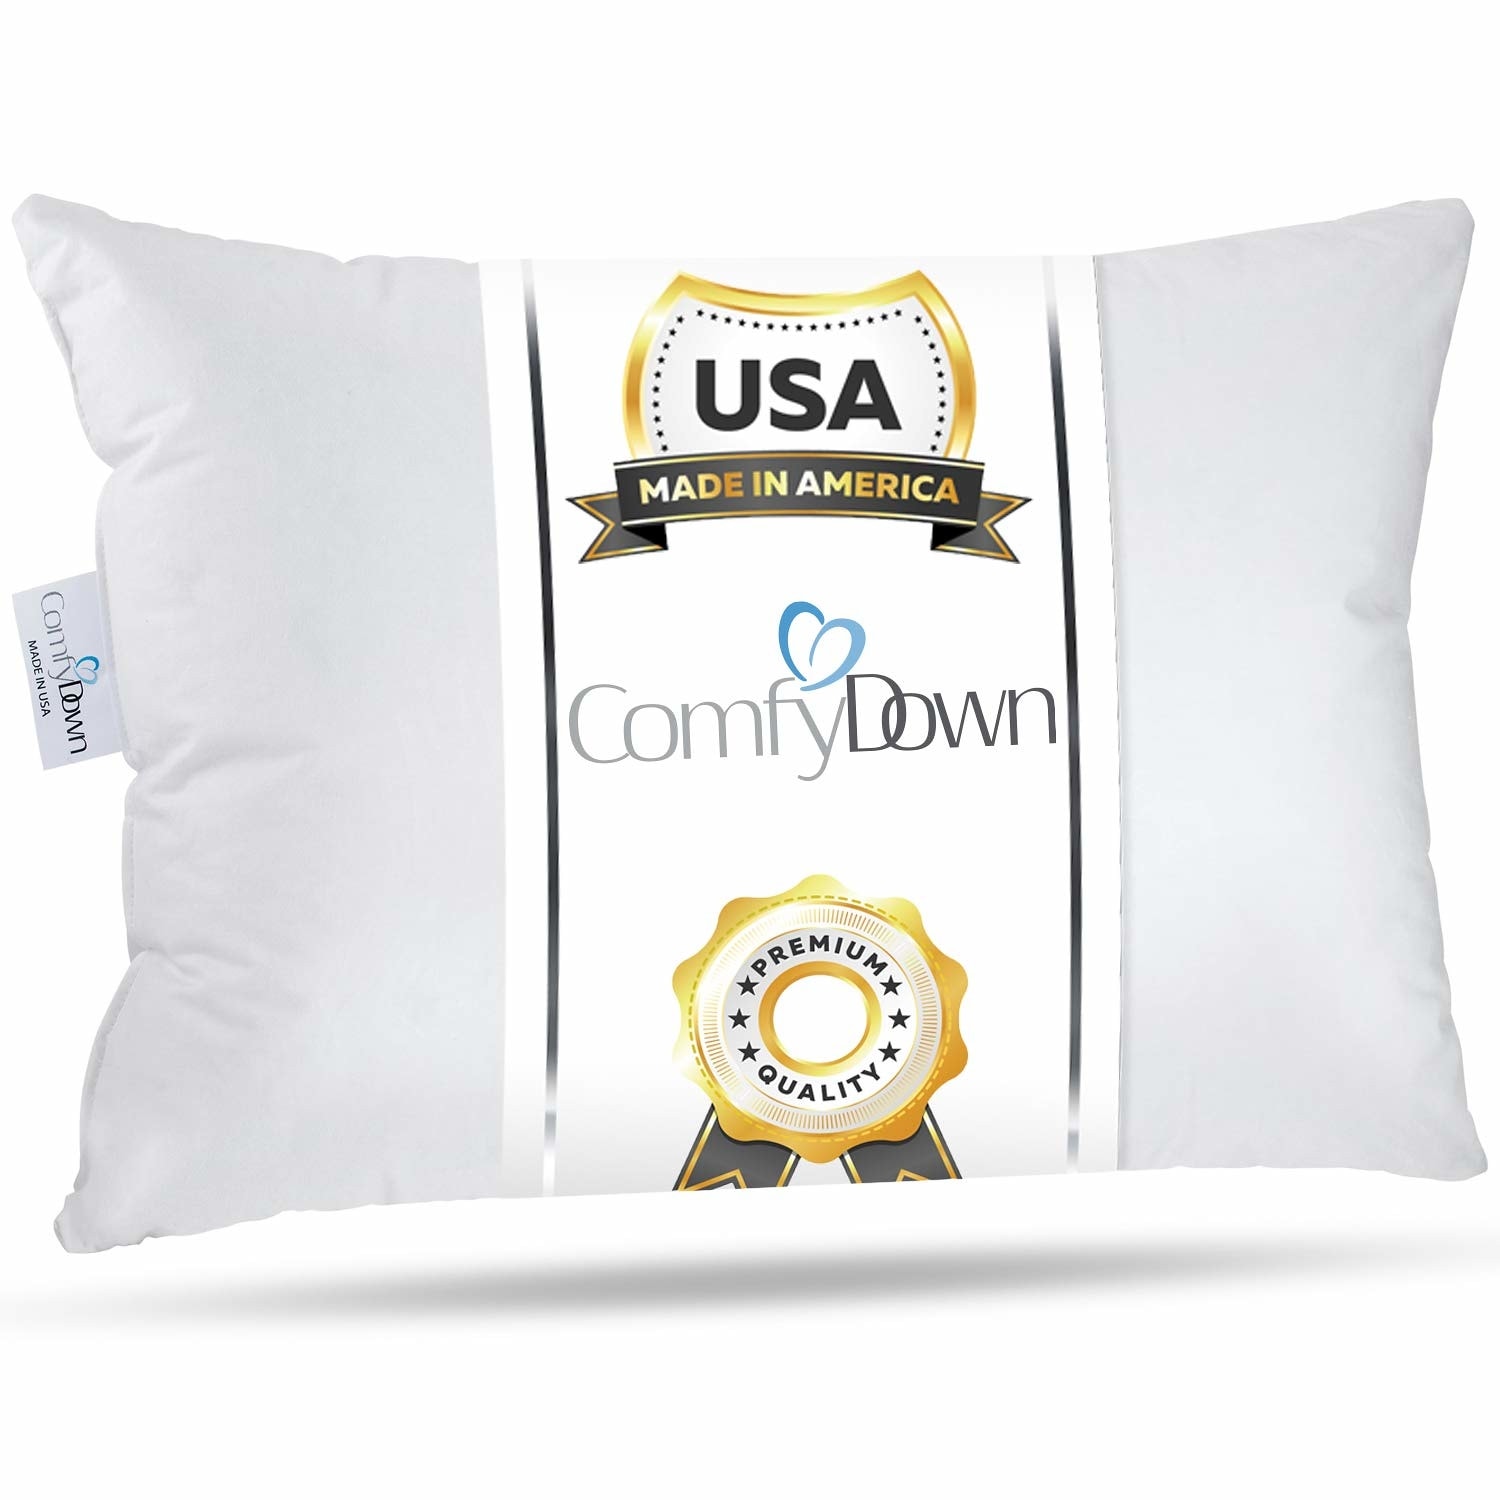 https://ak1.ostkcdn.com/images/products/is/images/direct/6788eed5c1b89b13598d4c9cd0b8aa043963ba3f/ComfyDown-Toddler-Pillow---Filled-with-800-FP-Goose-Down%2C-300-TC-Cotton-Cover---13%22X18%22.jpg